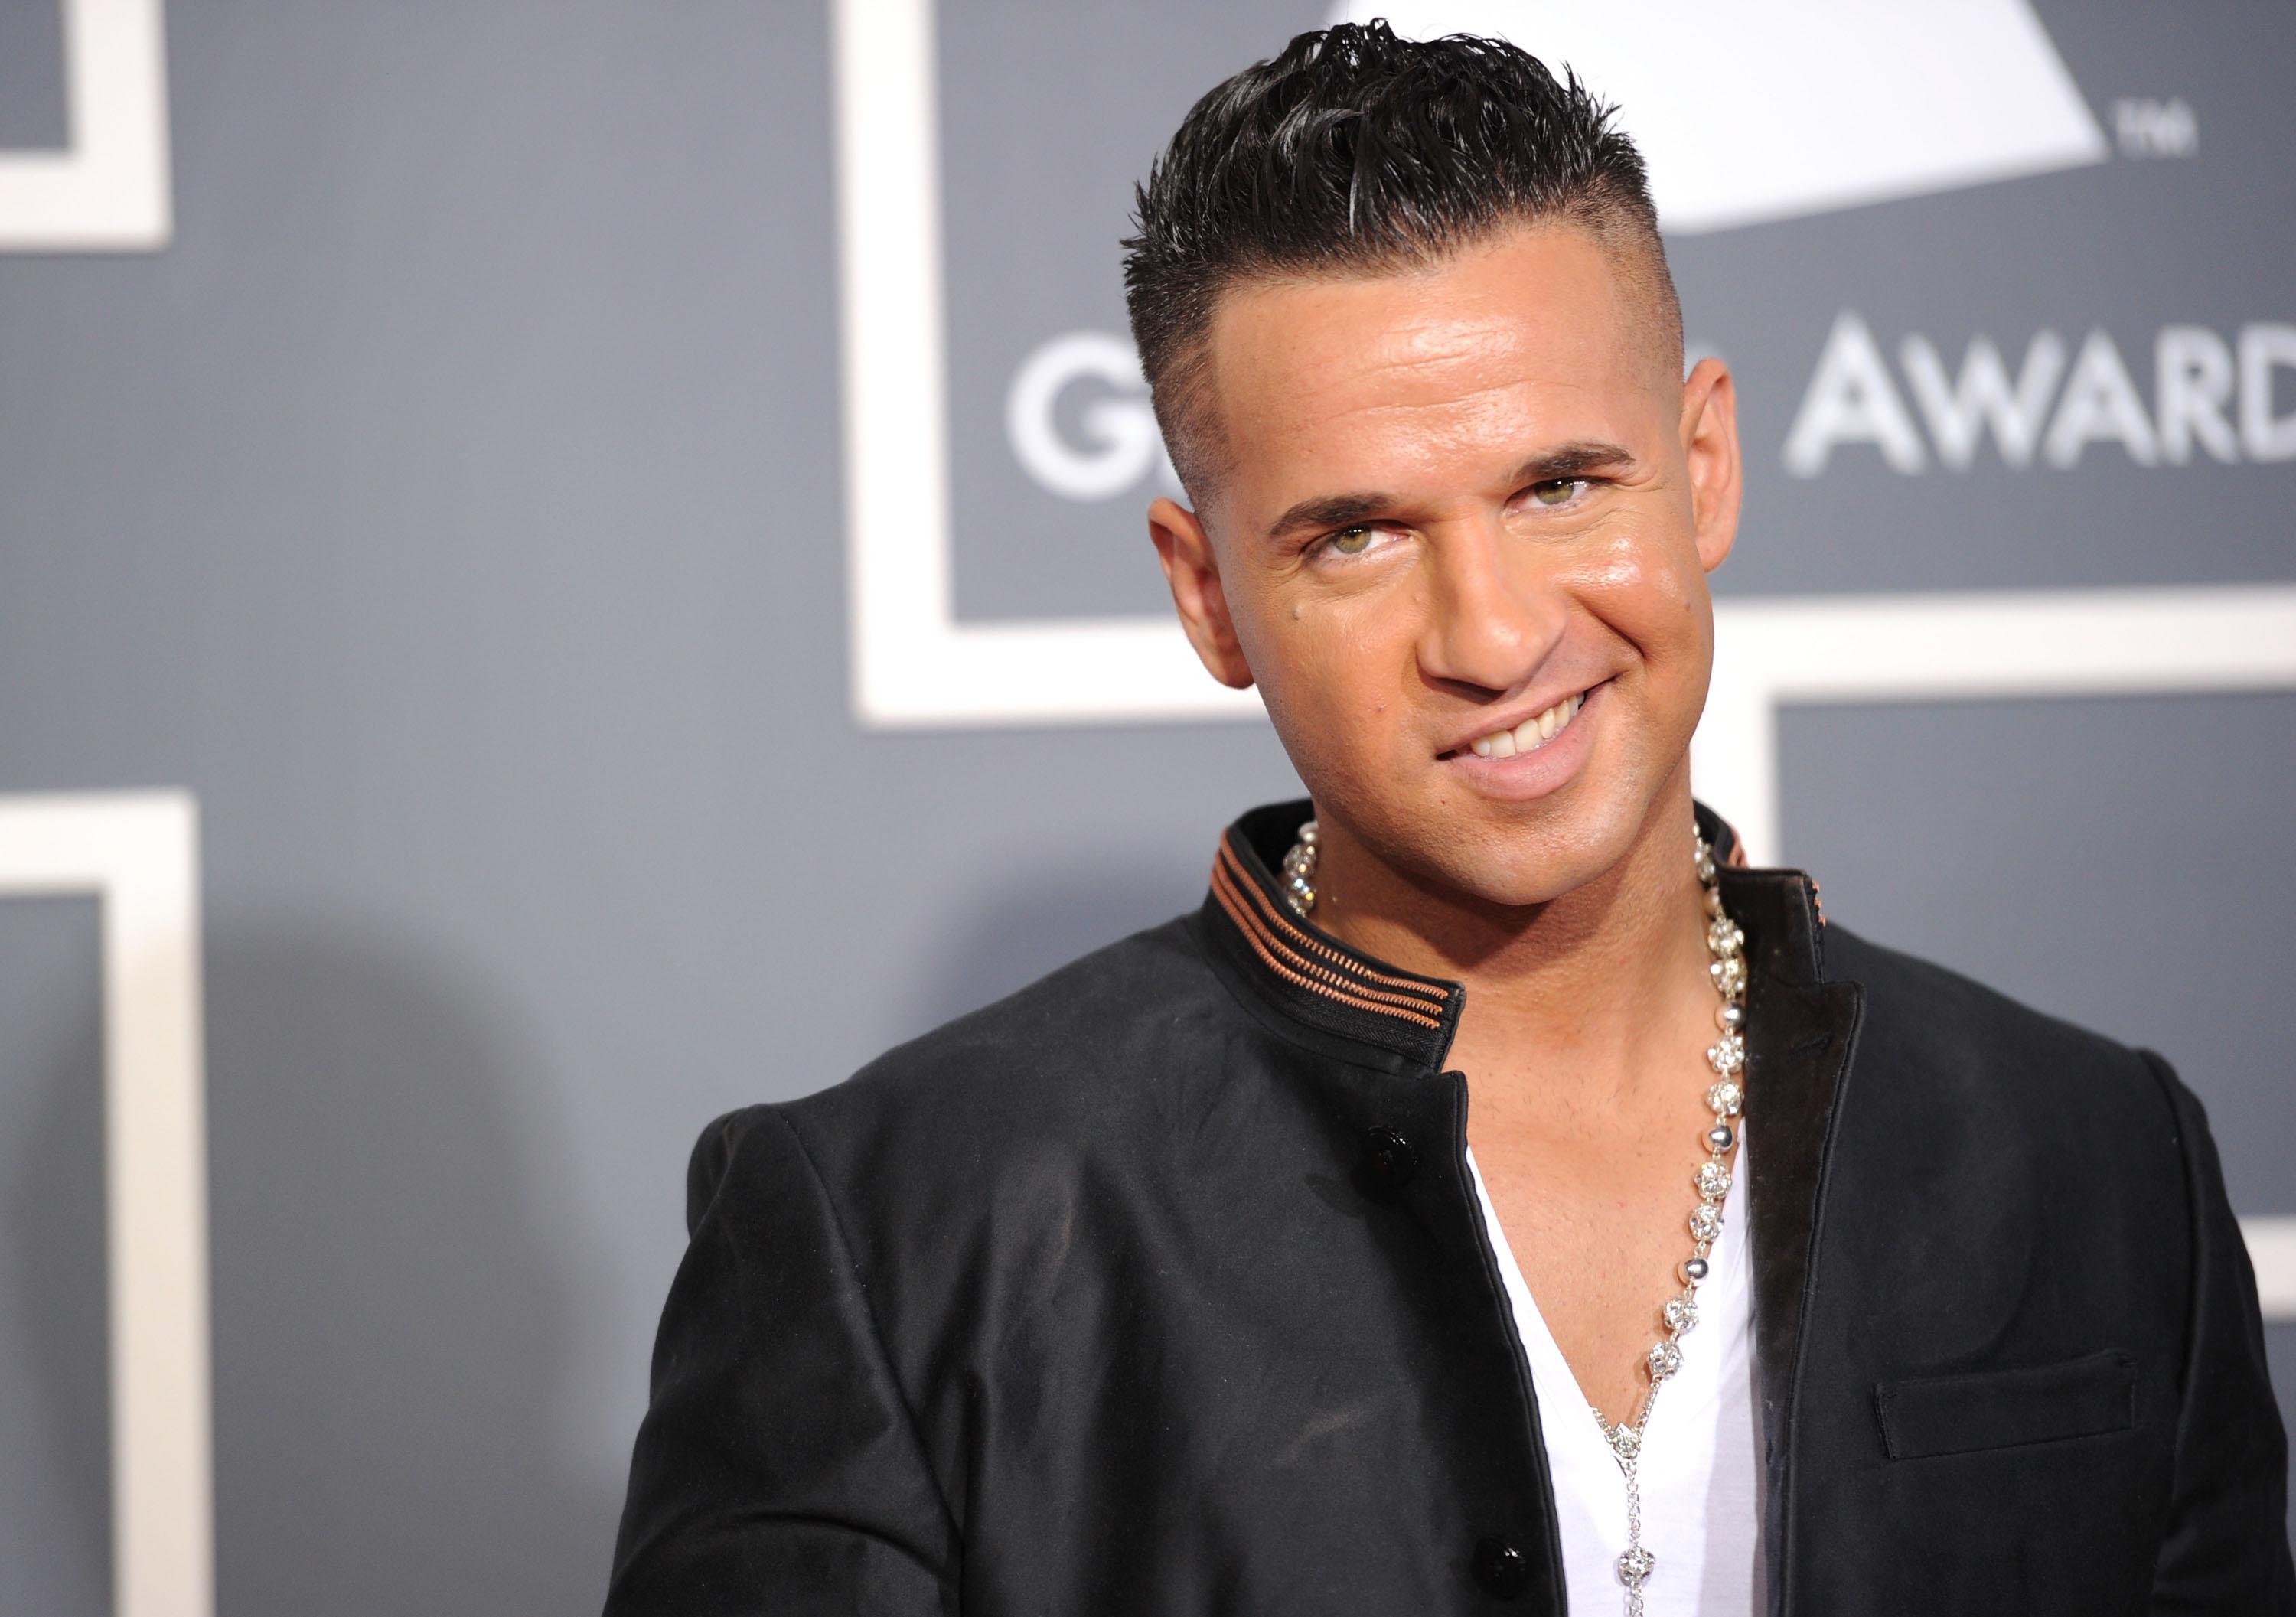 Mike ‘The Situation’ Sorrentino Reveals His Post Prison Body, And He is RIPPED!!